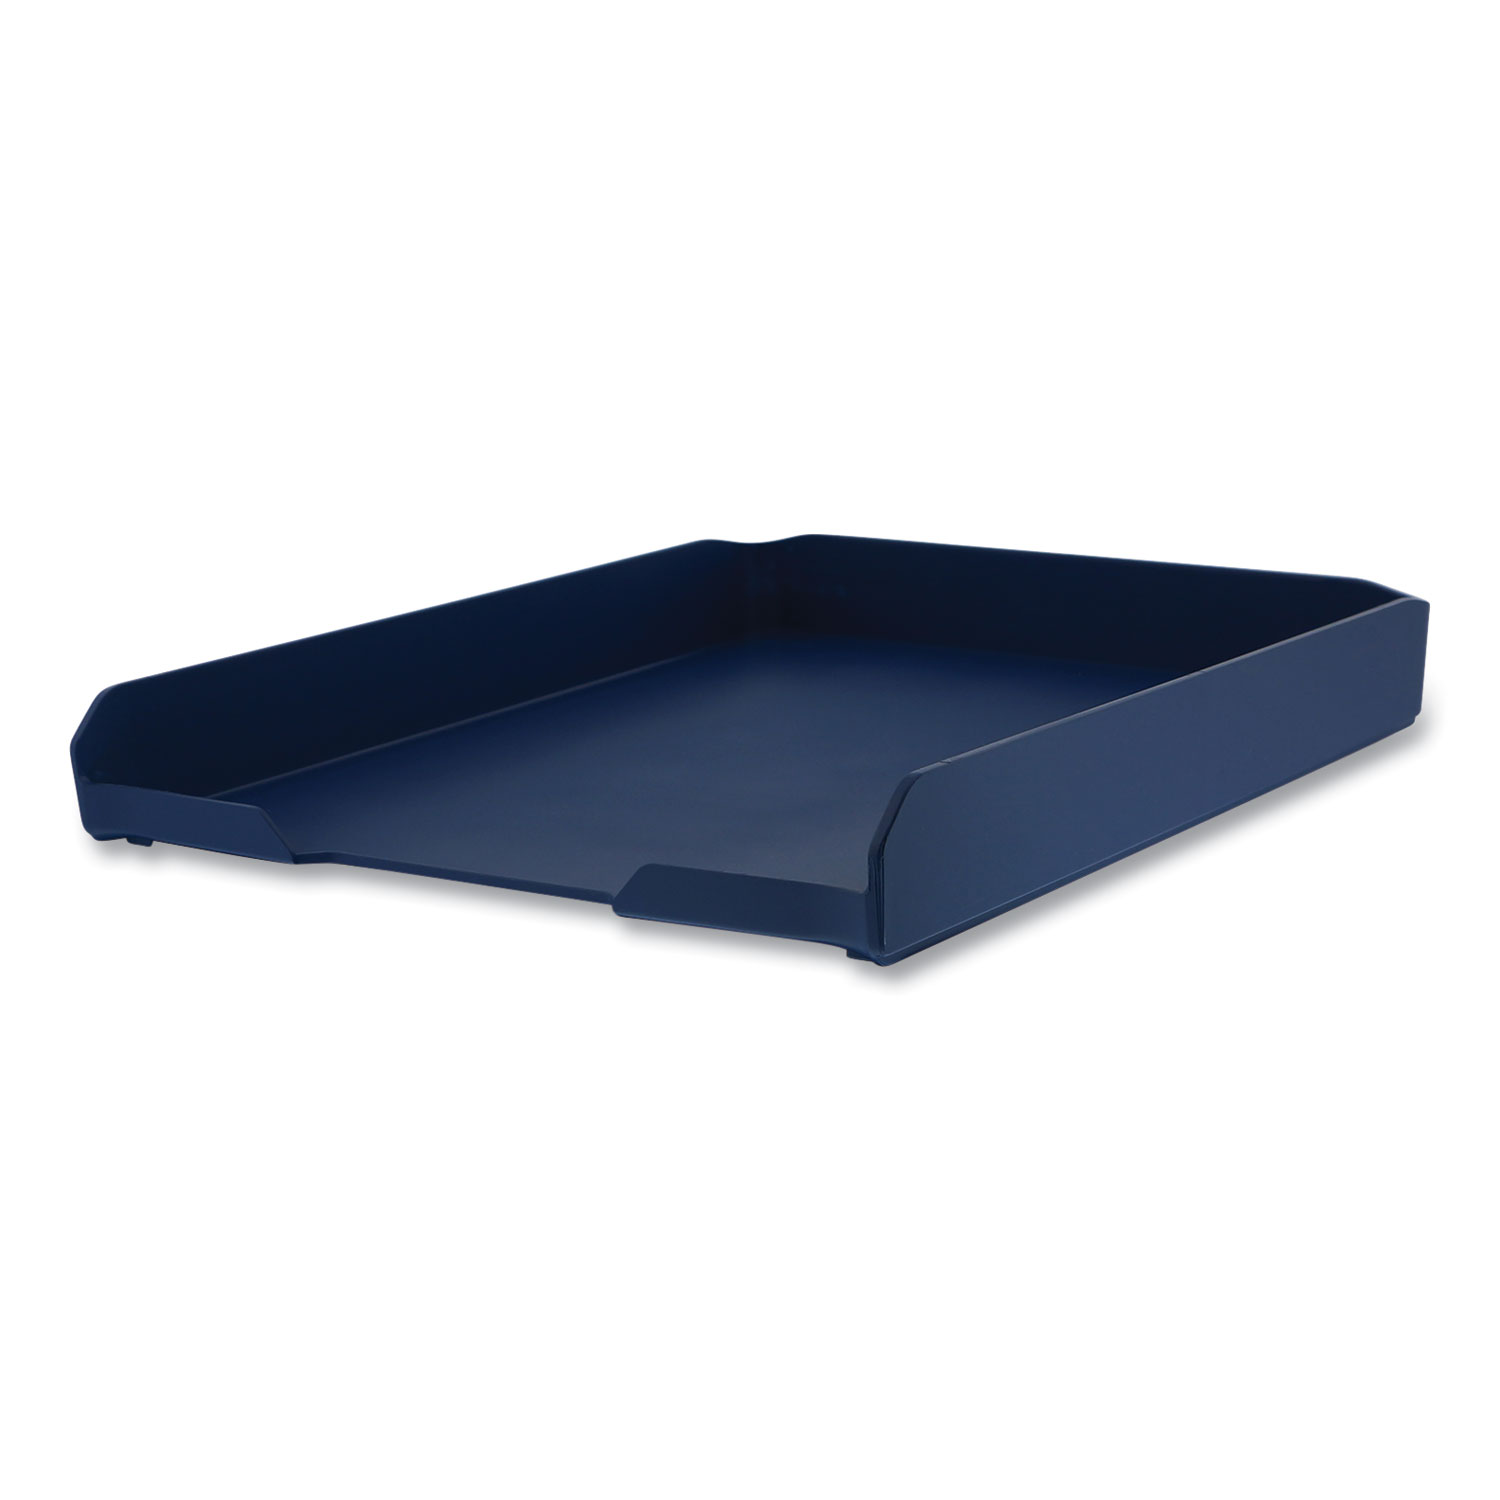  Bostitch KT-TRAY-BLUE Konnect Stackable Letter Tray, 1 Section, Letter Size Files, 10.13 x 12.25 x 1.63, Blue (BOS24357590) 